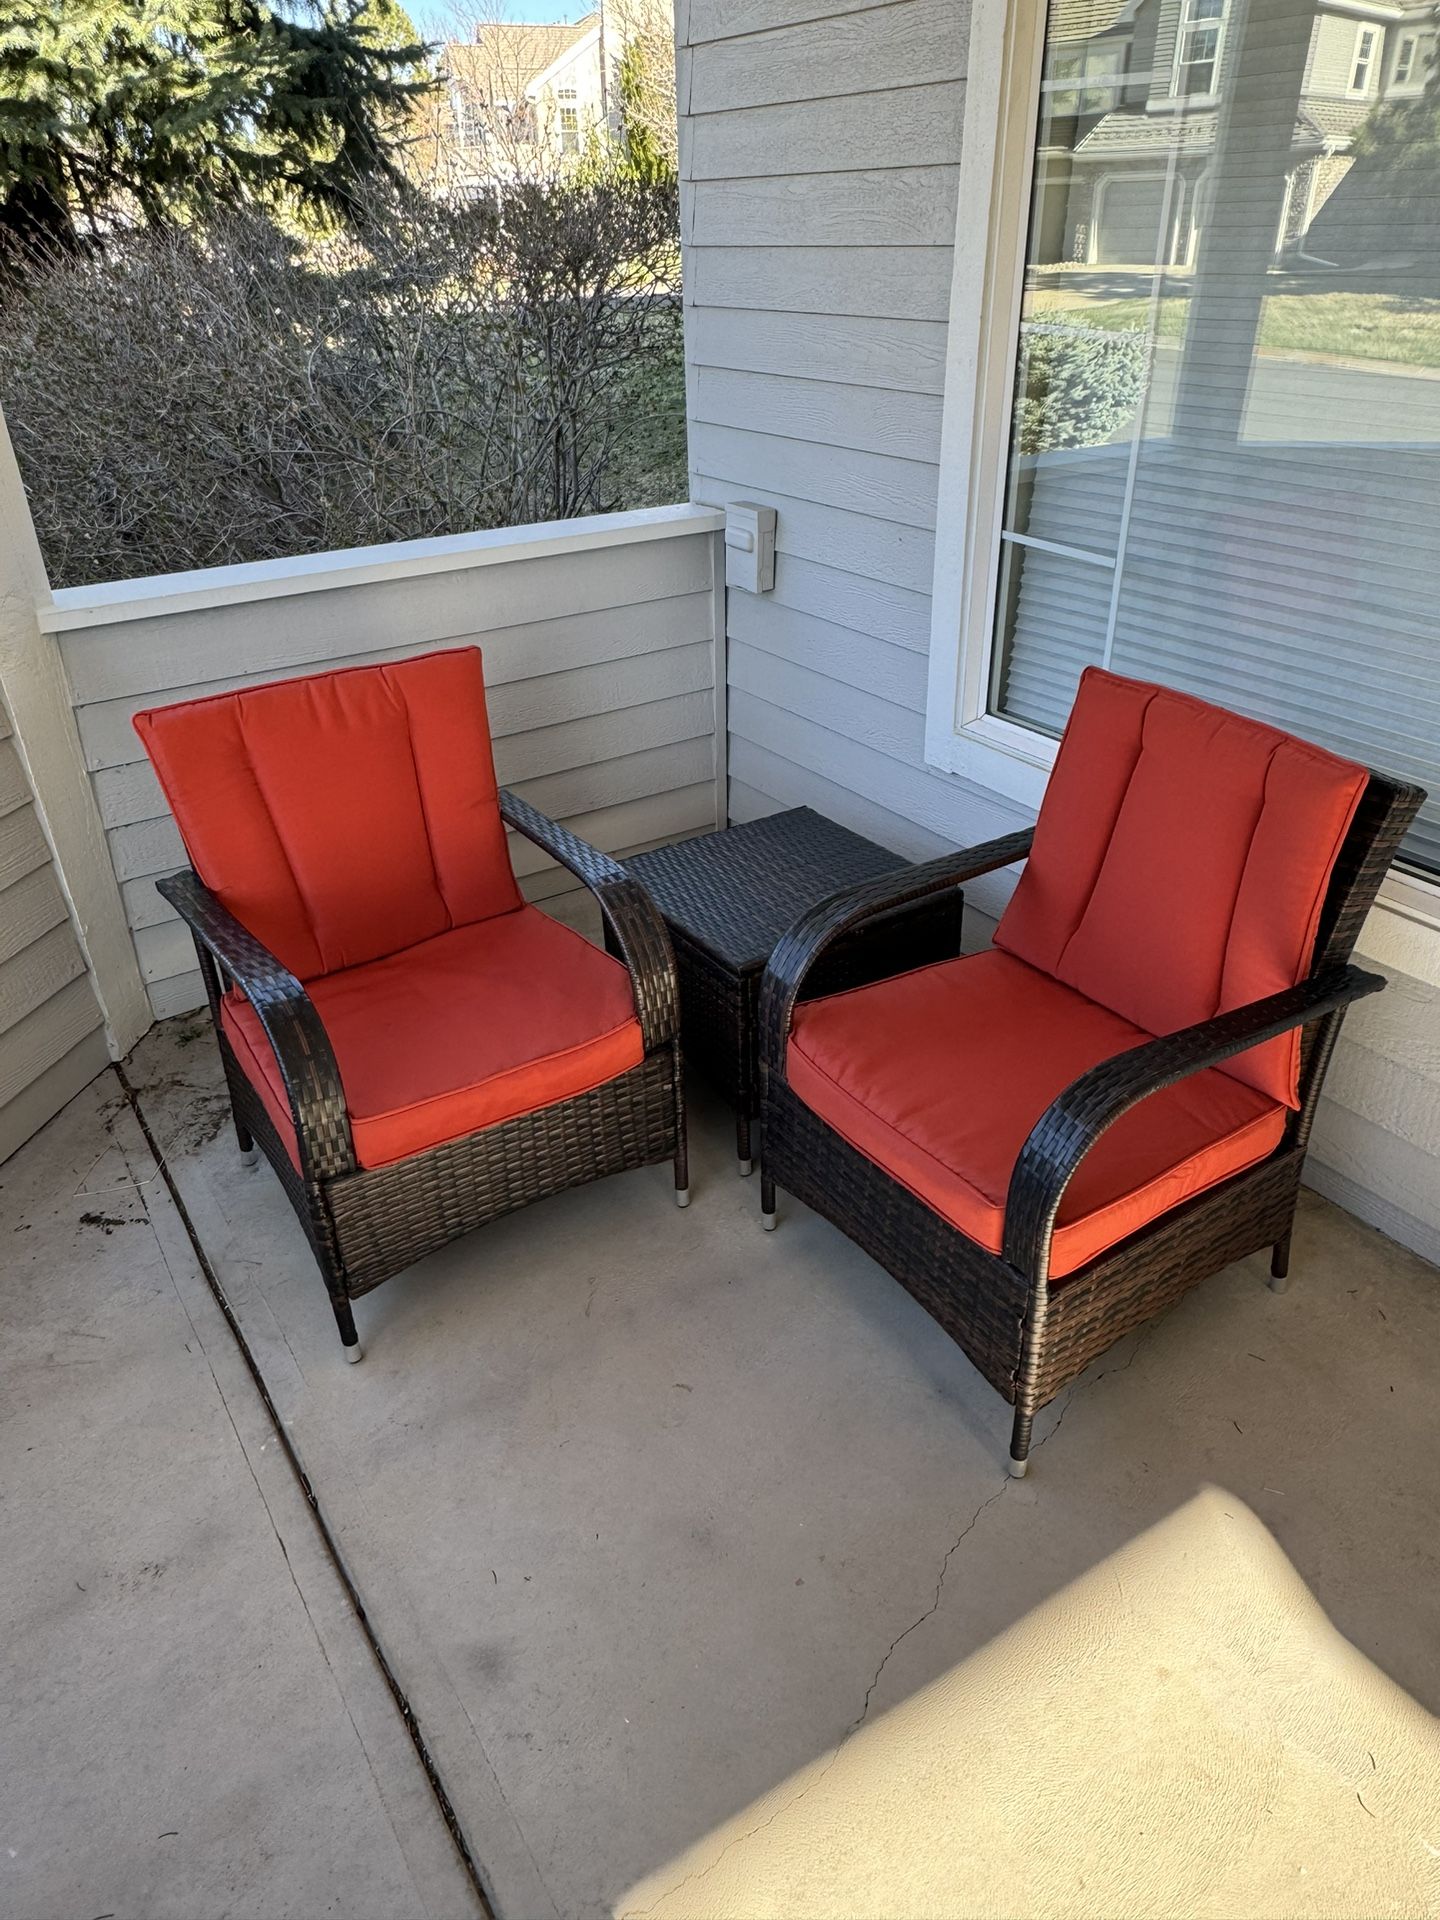 Patio or deck Chair set